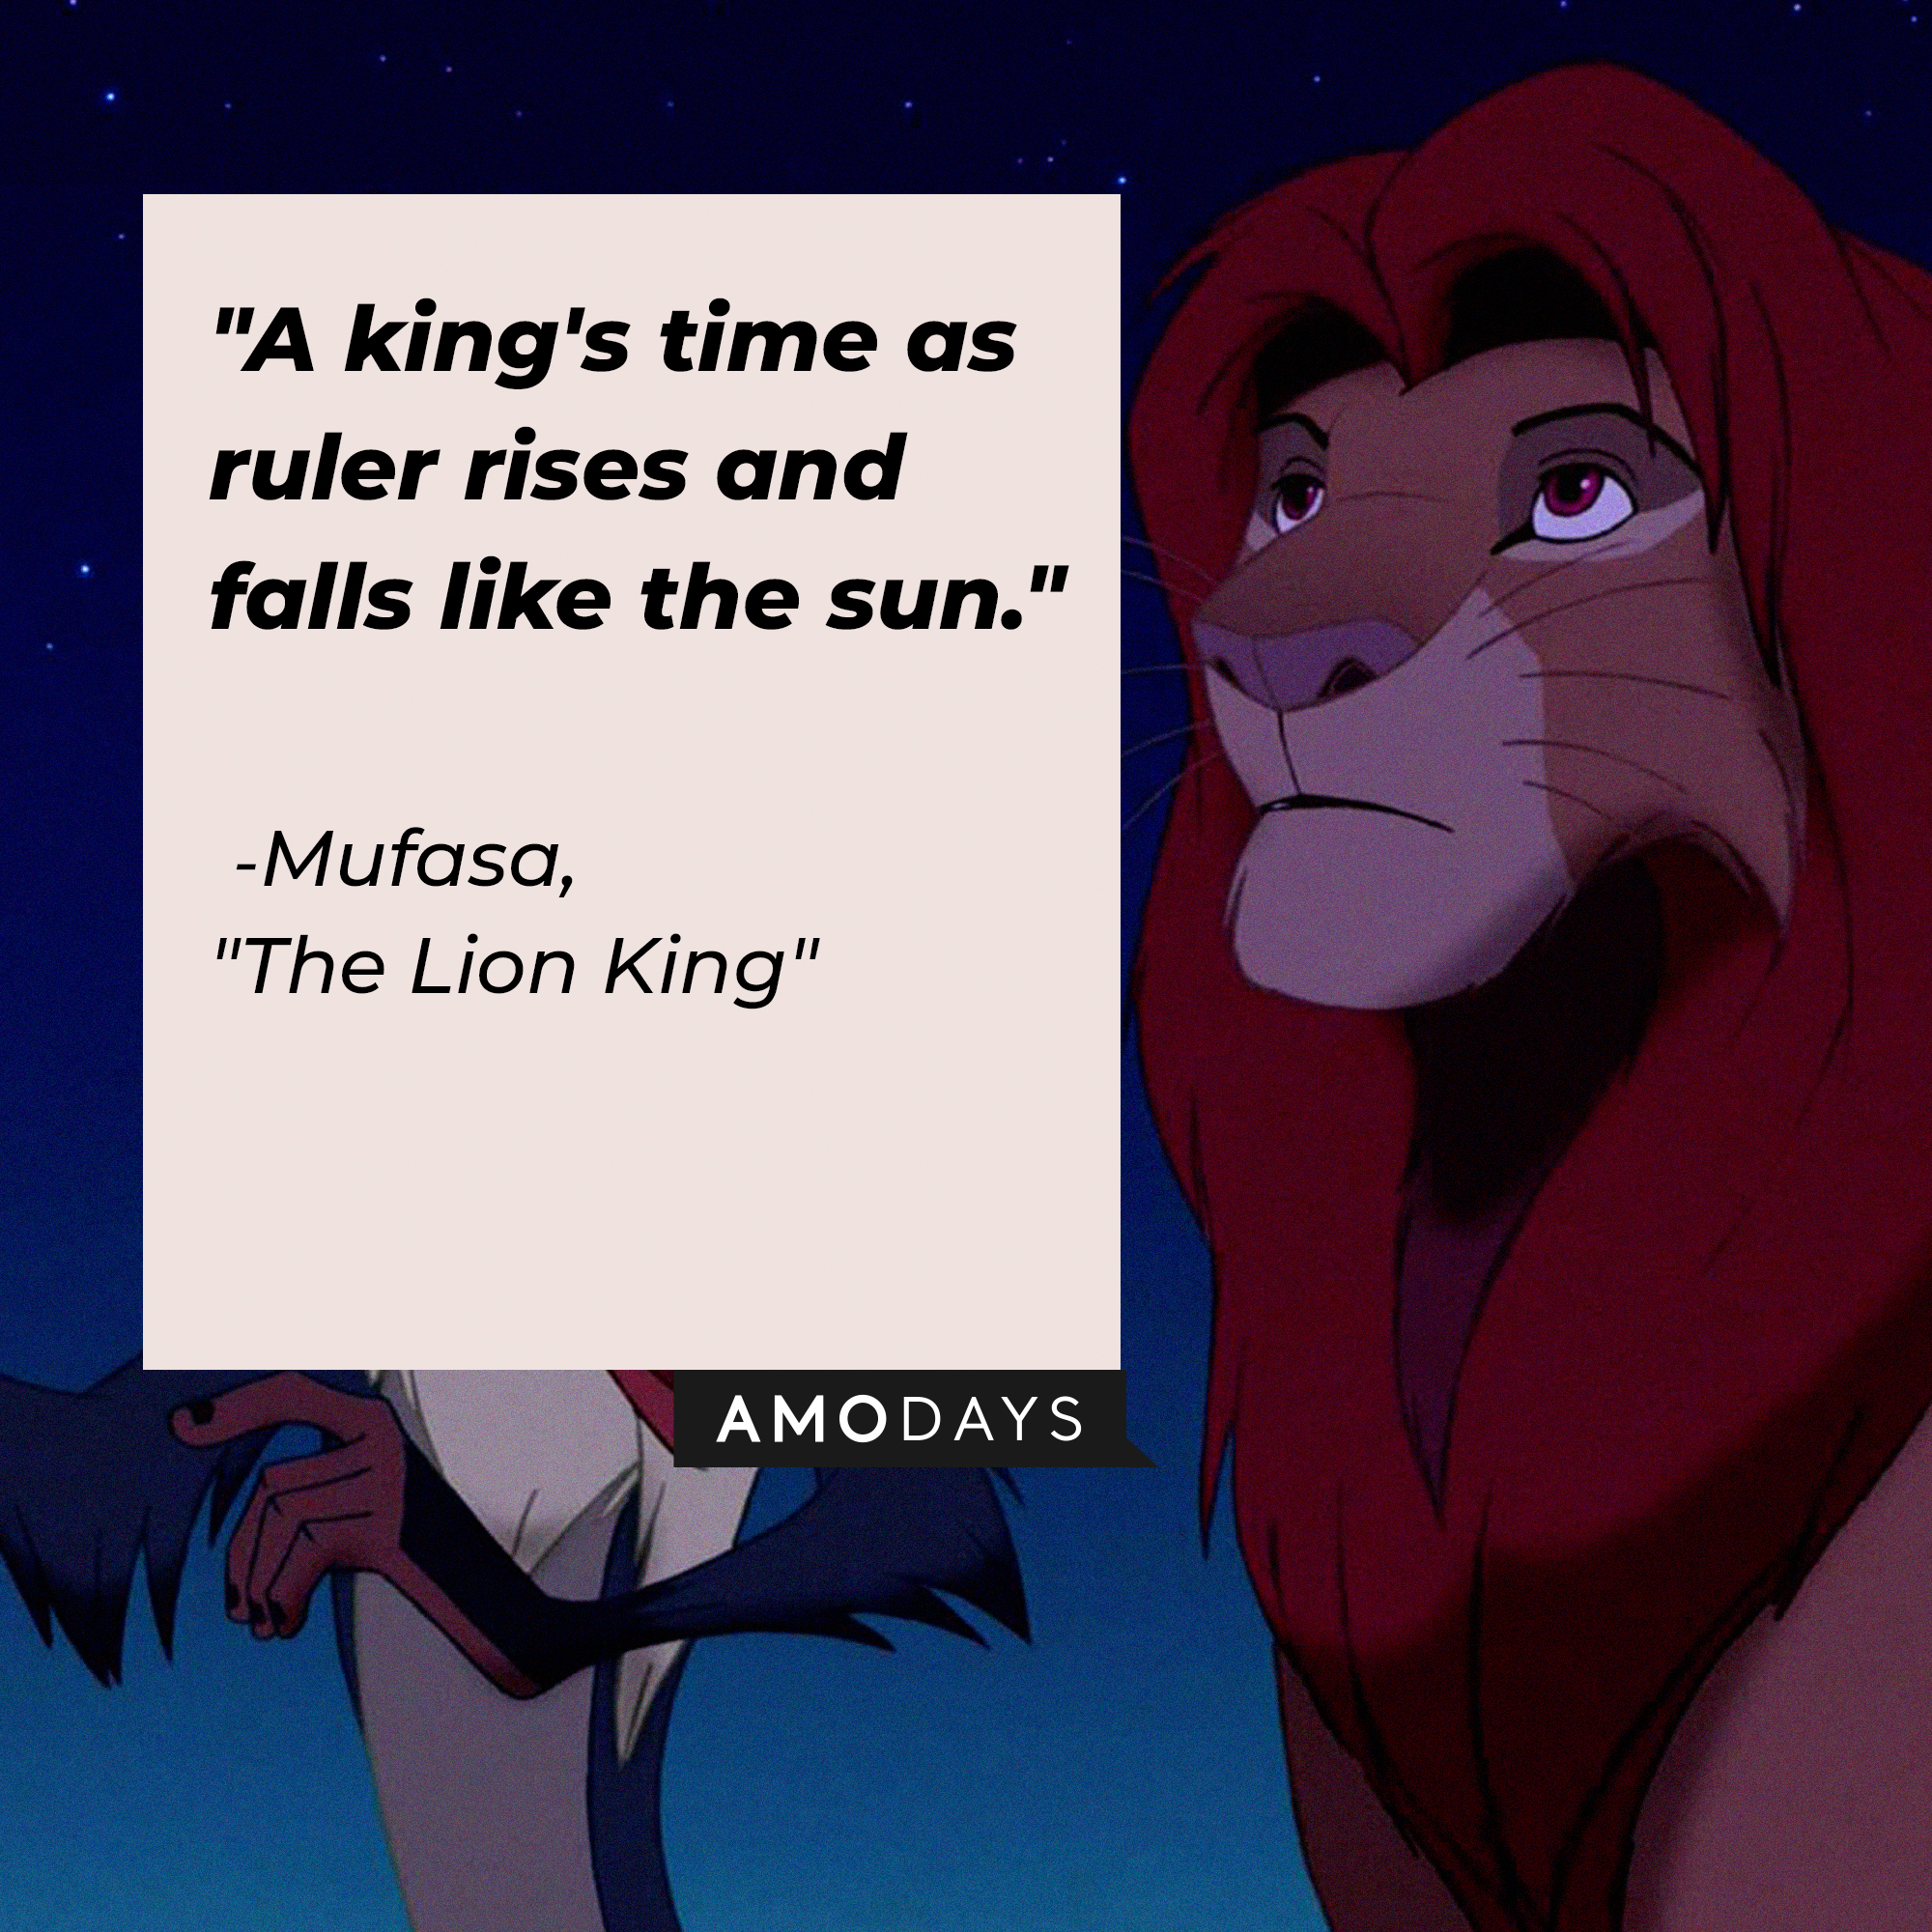 Mufasa with his quote: "A king's time as ruler rises and falls like the sun." | Source: Facebook.com/DisneyTheLionKing